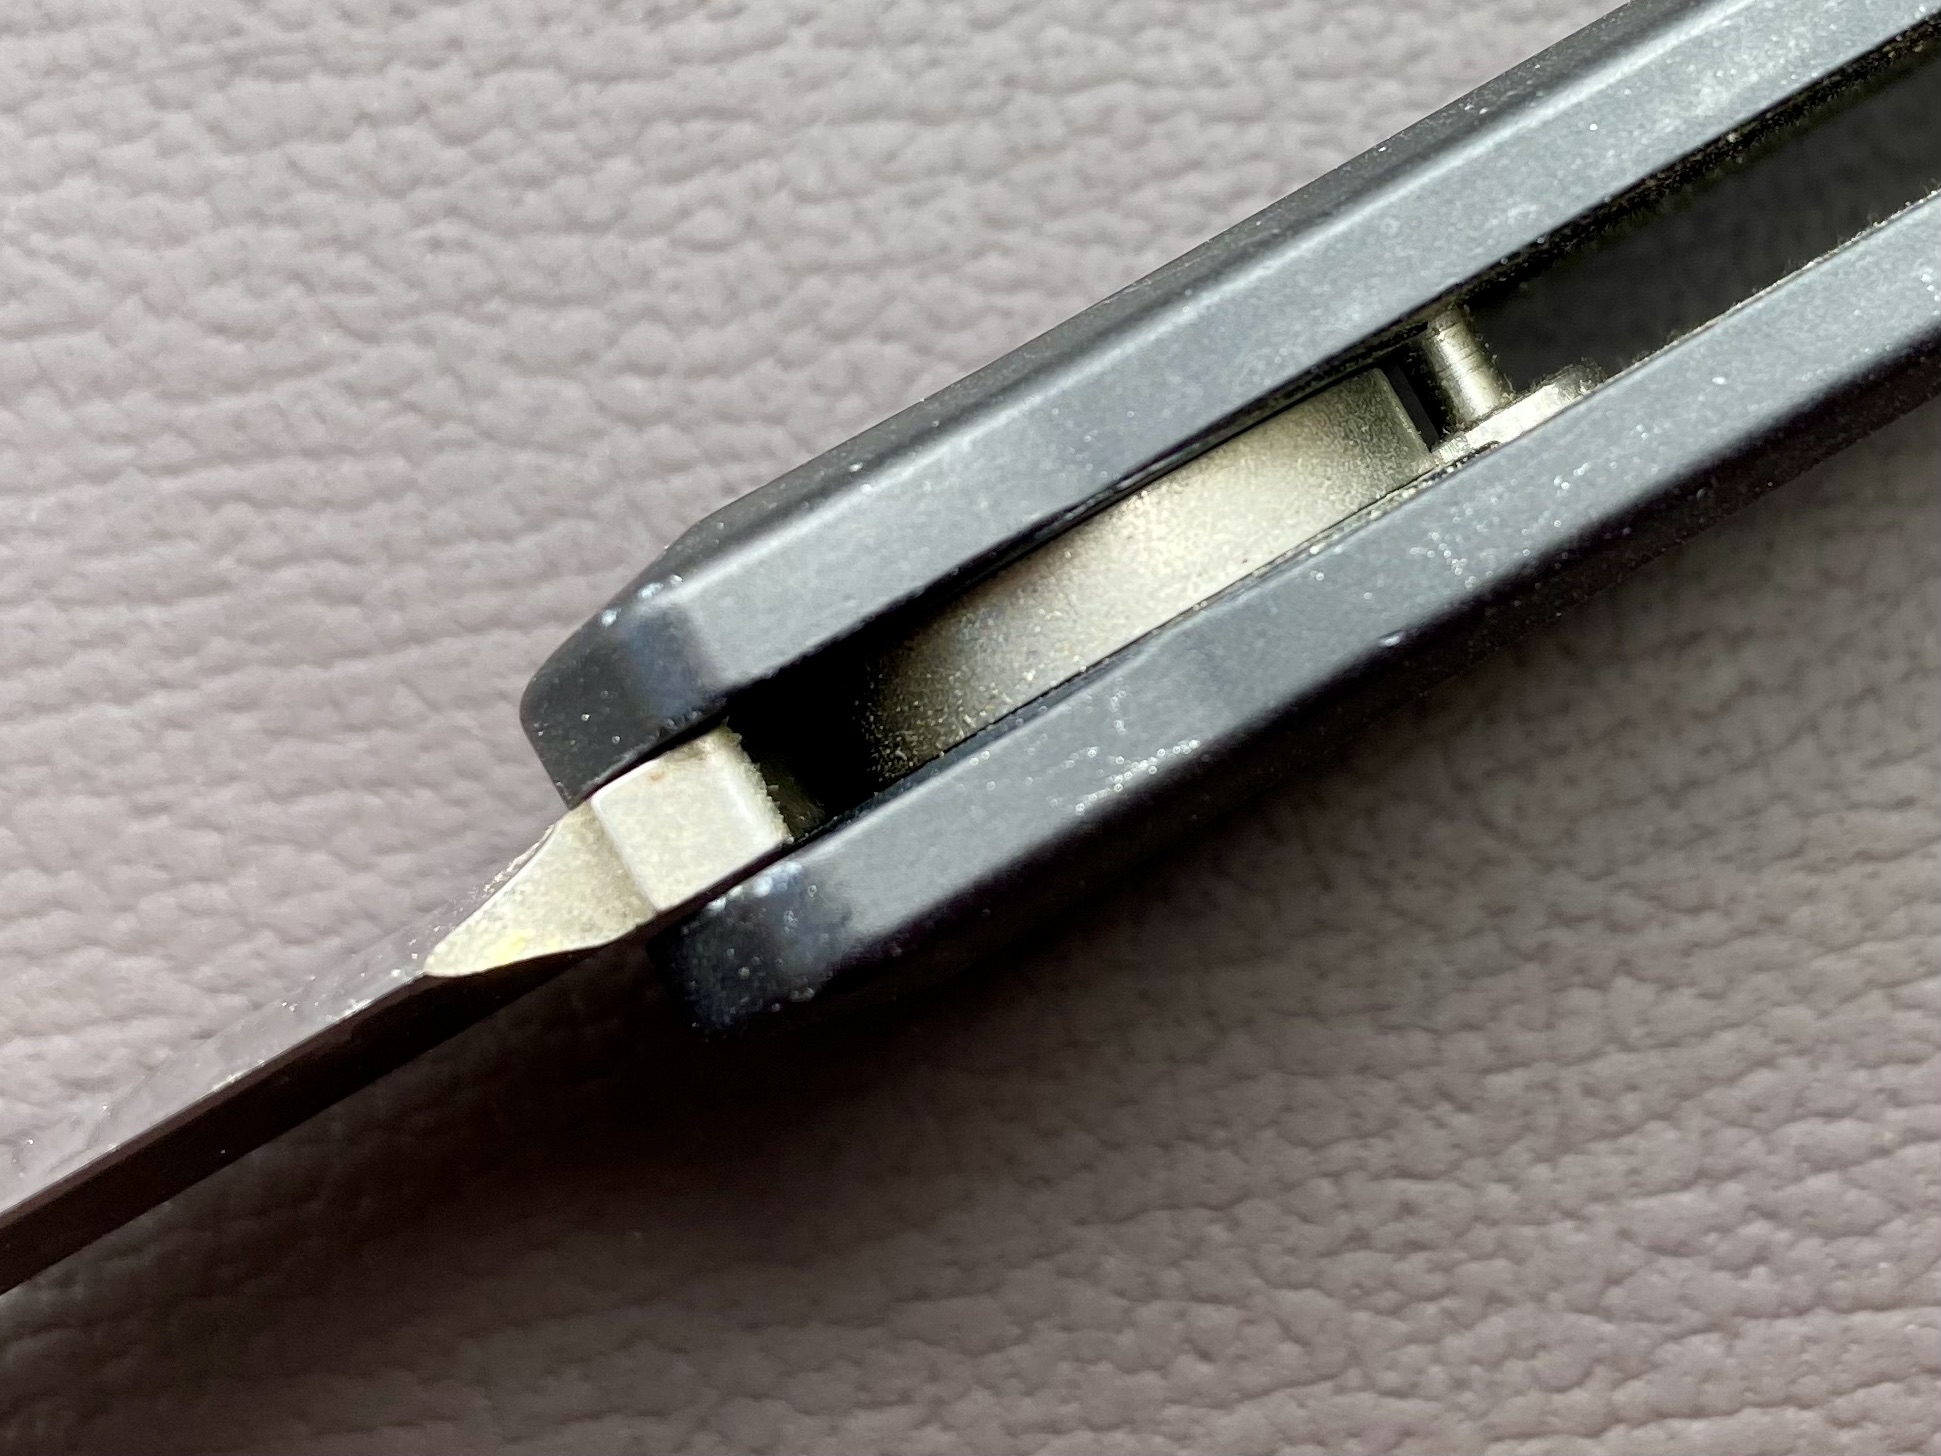 Inside the handle, the very thin contact surface of the lock is visible.